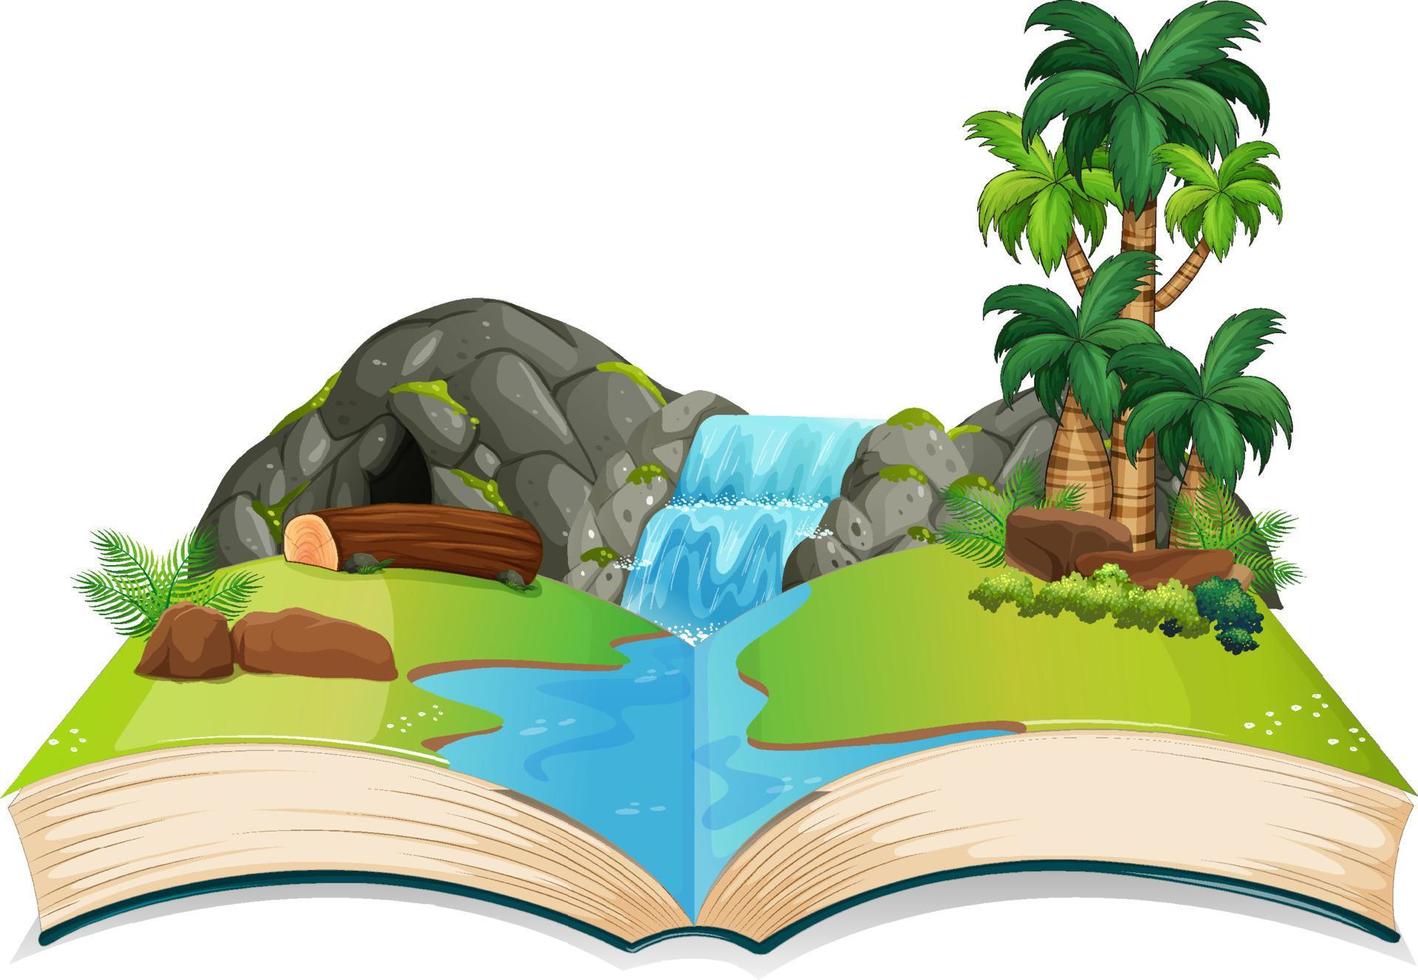 Book with waterfall and trees in the scene vector